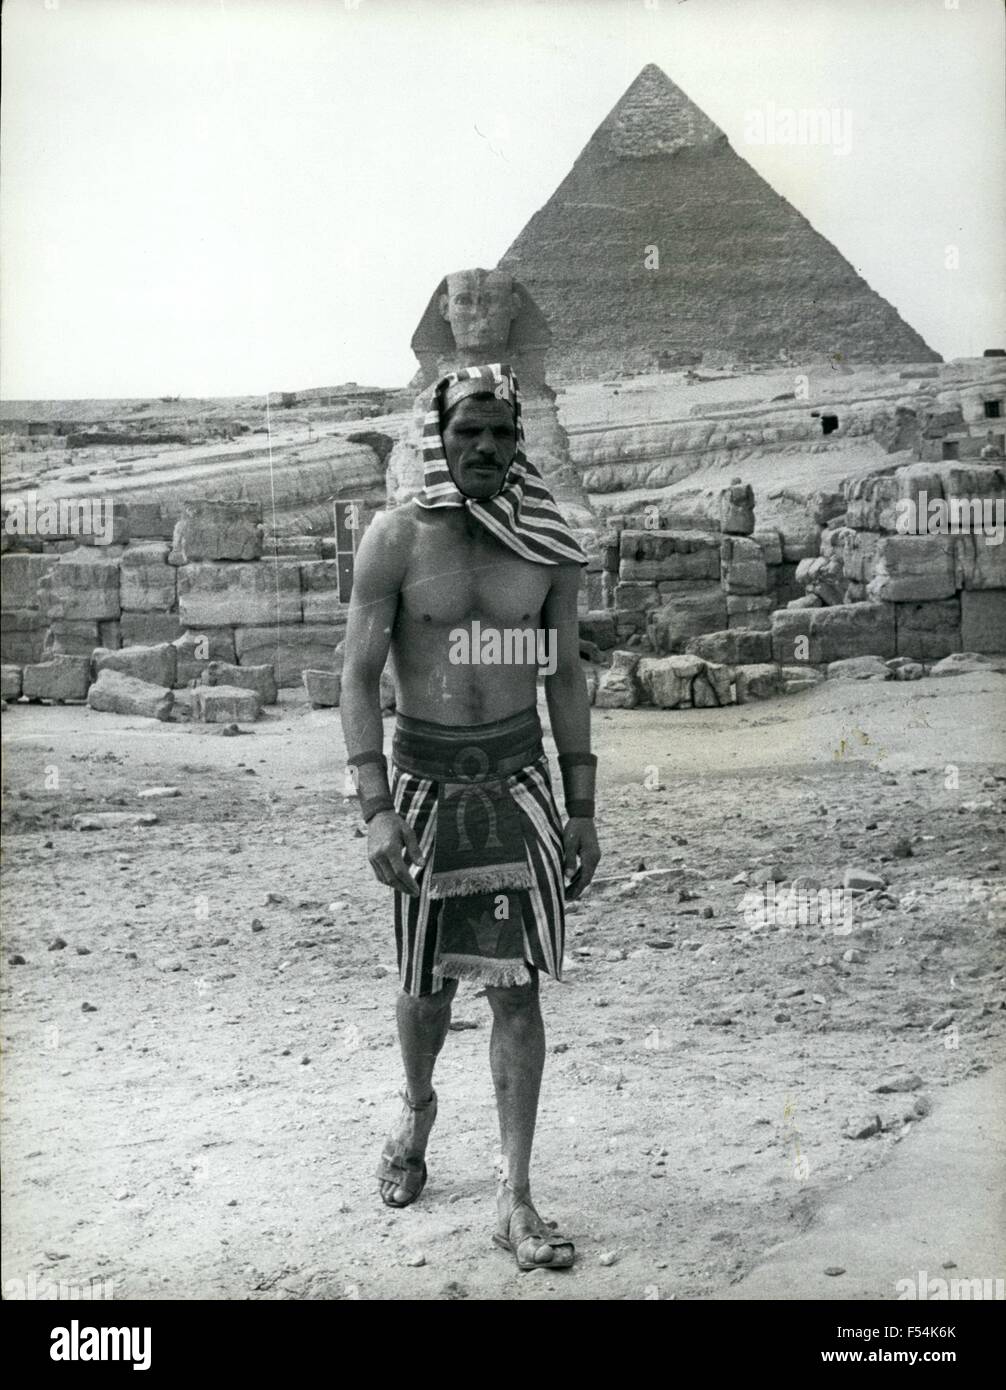 1972 - A lot of tourists may get the scare of their lives, mistaking hefnawl for a pharaoh who has risen from his tomb. But harmless hefnawi is only out to make a decent pound their wallets. © Keystone Pictures USA/ZUMAPRESS.com/Alamy Live News Stock Photo